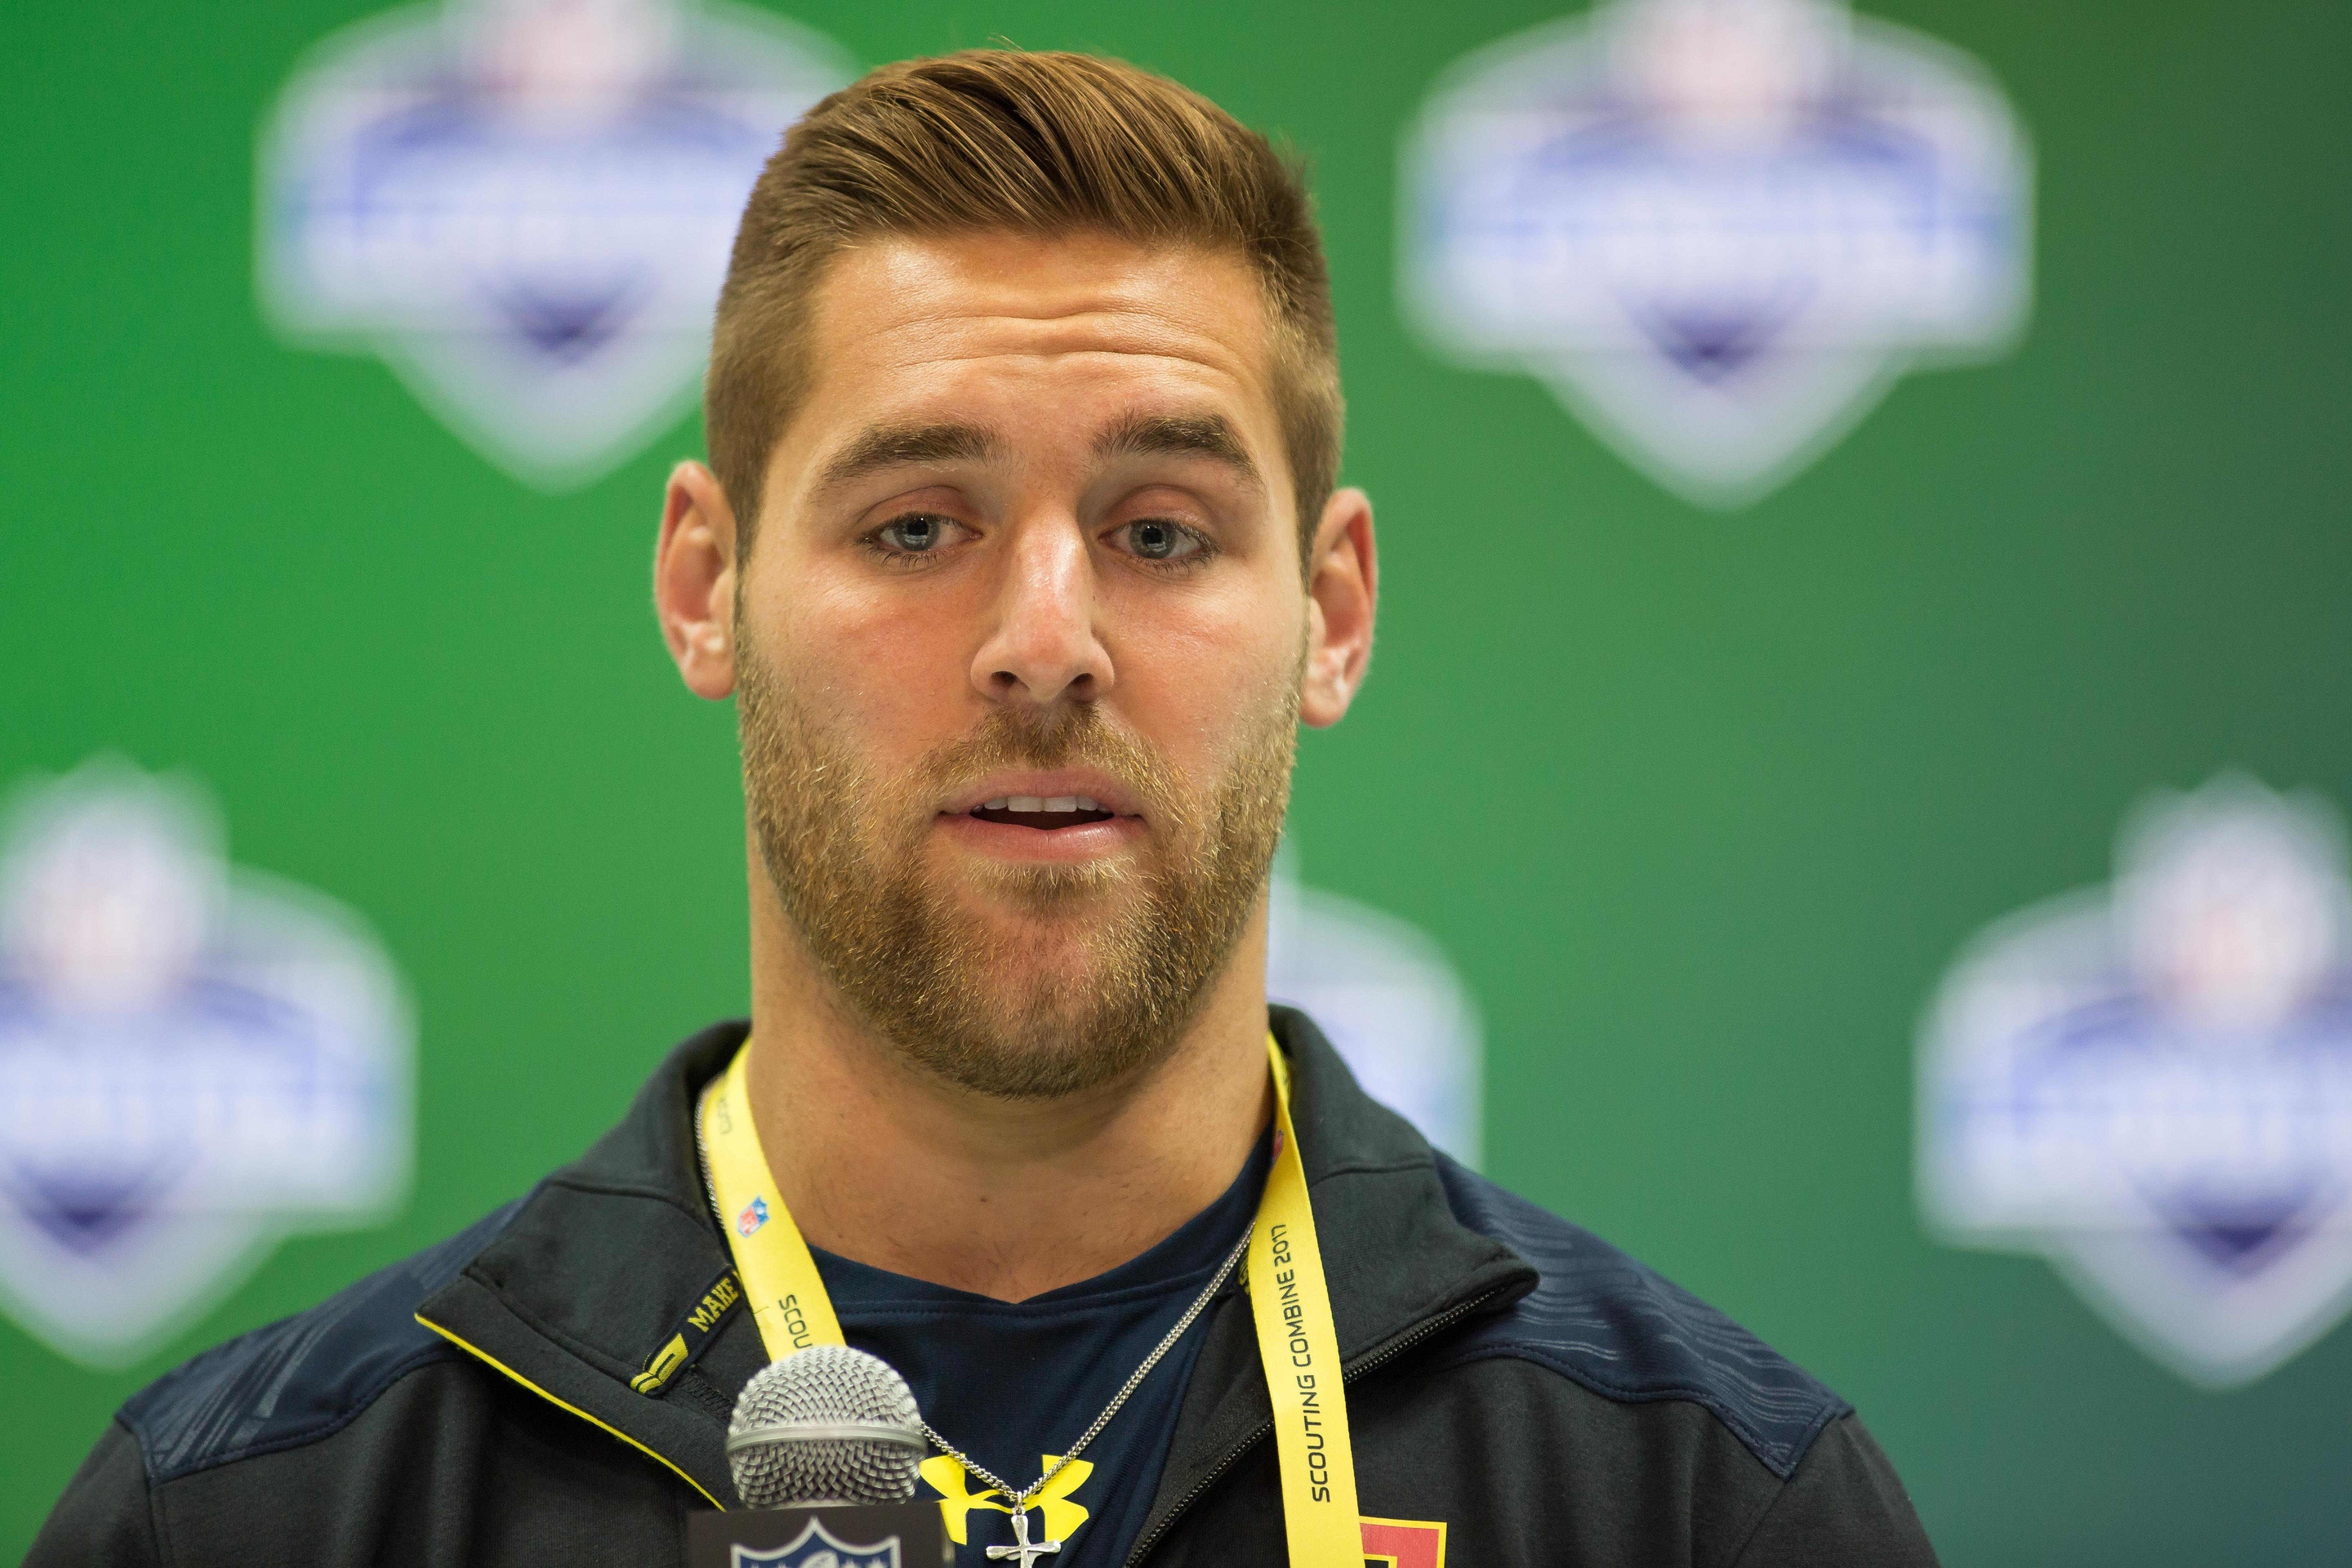 Mar 2, 2017; Indianapolis, IN, USA; Texas A&M quarterback Trevor Knight speaks to the media during the 2017 combine at Indiana Convention Center. Mandatory Credit: Trevor Ruszkowski-USA TODAY Sports